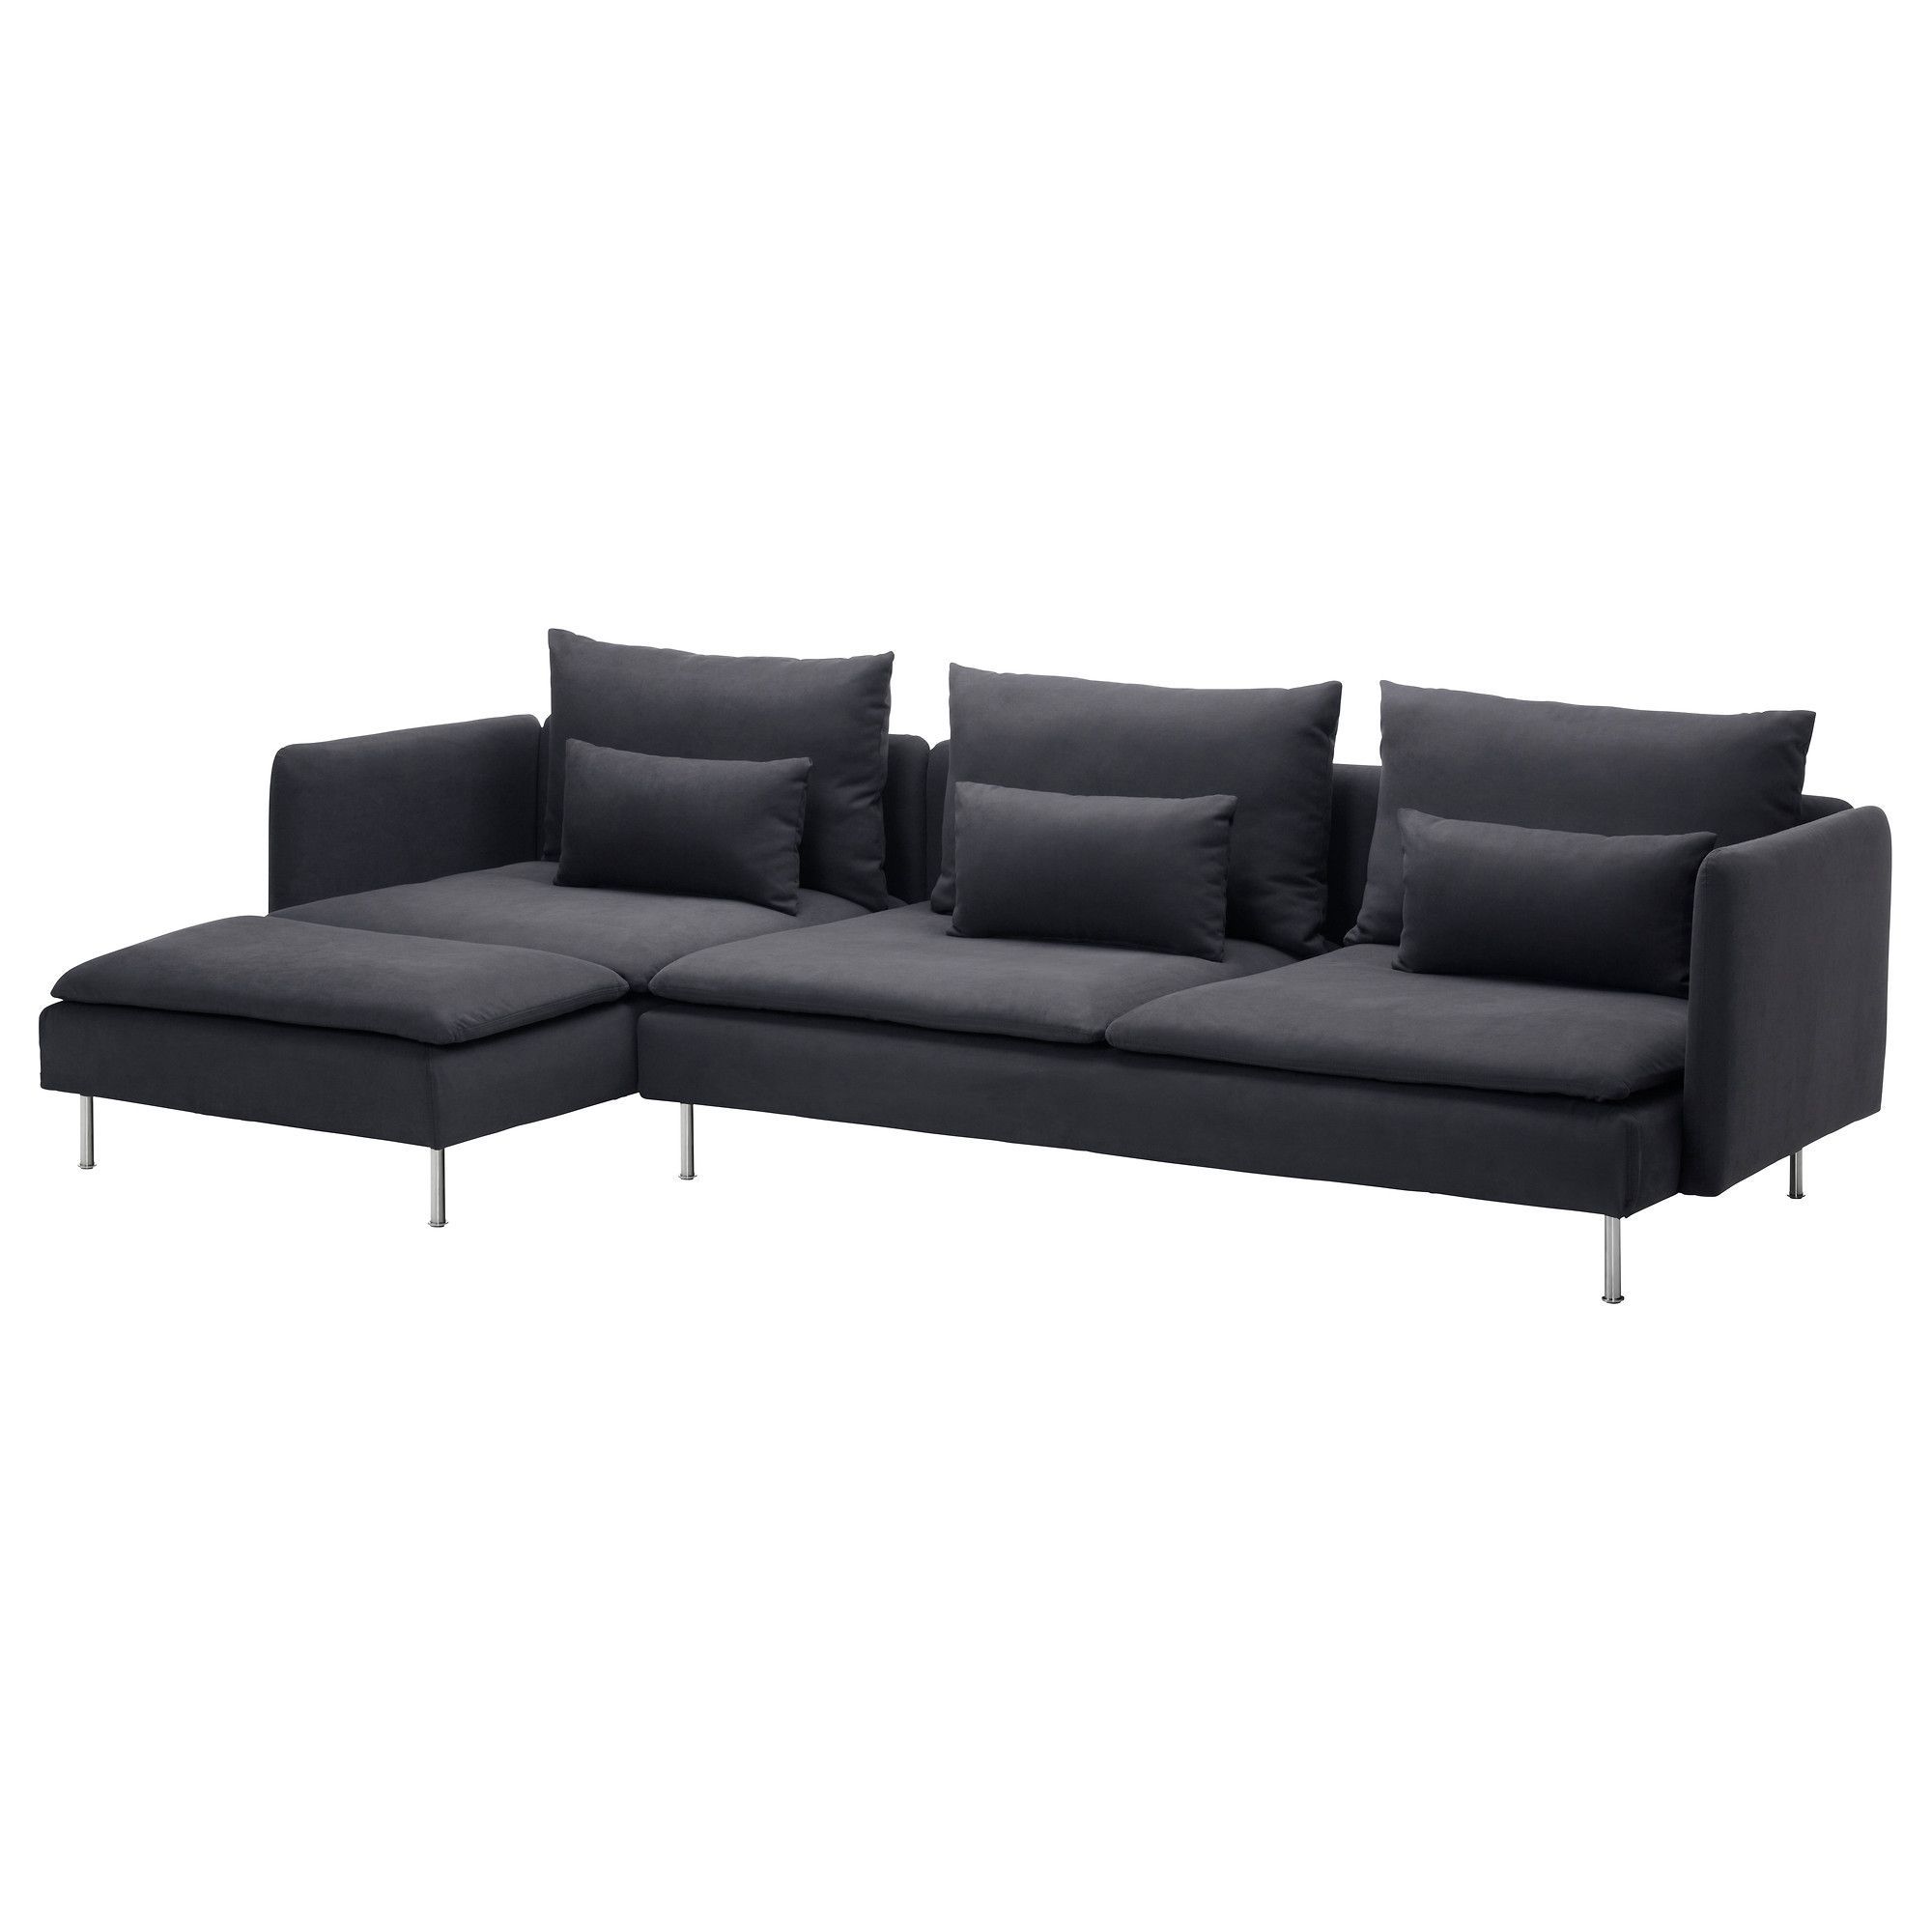 Us – Furniture And Home Furnishings | Ikea Sofa, Modular Inside Riley Retro Mid Century Modern Fabric Upholstered Left Facing Chaise Sectional Sofas (View 1 of 15)